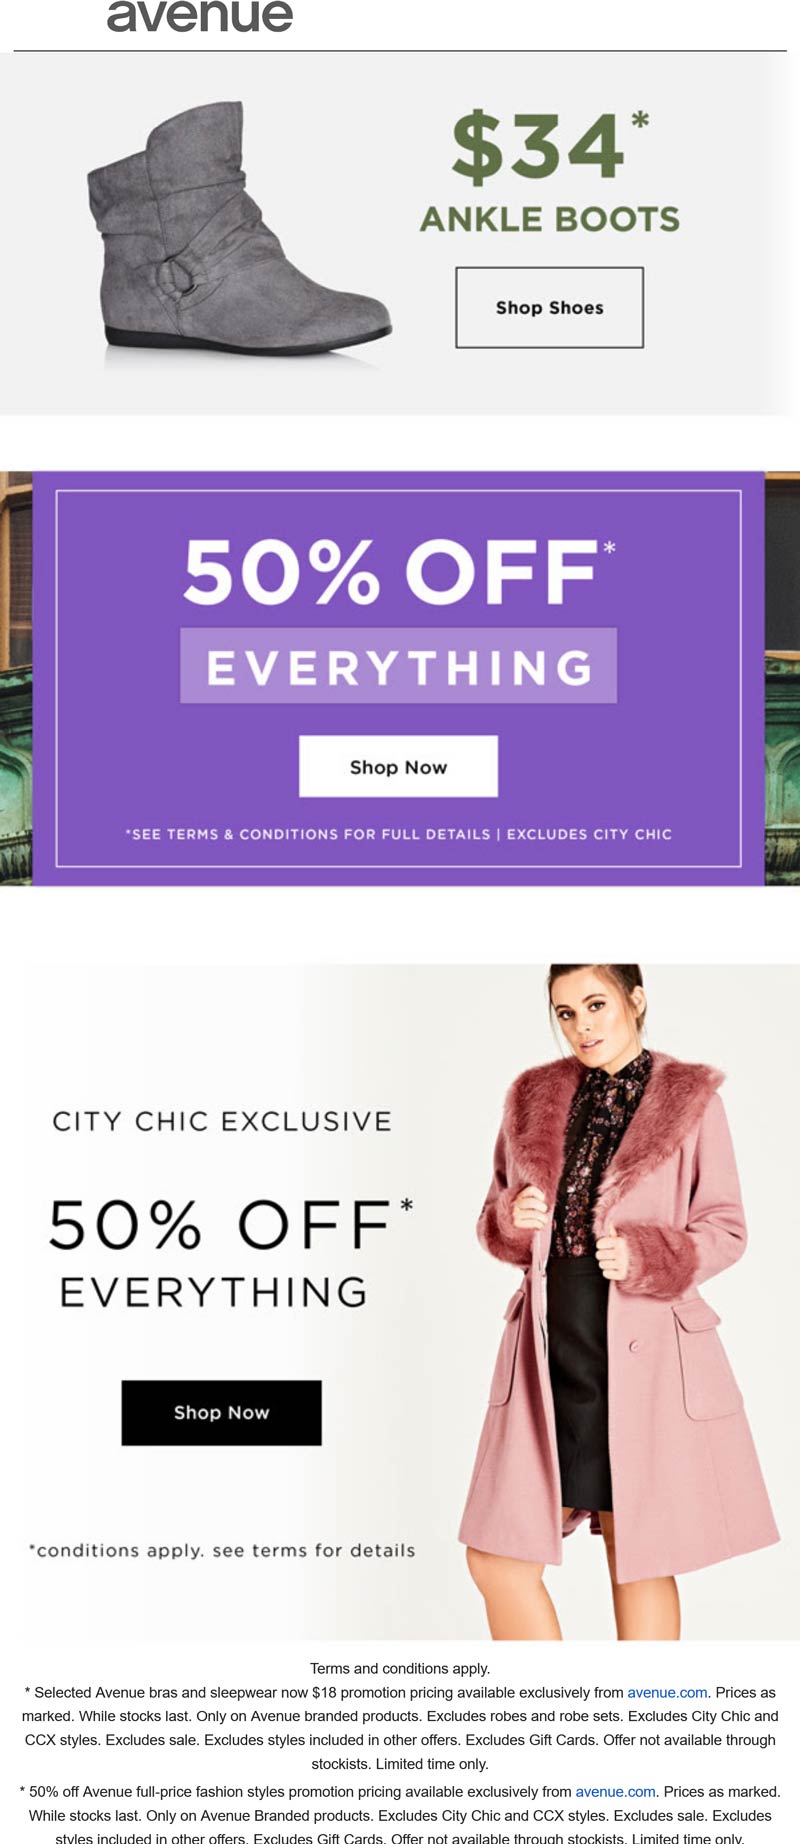 50 off everything at Avenue avenue The Coupons App®